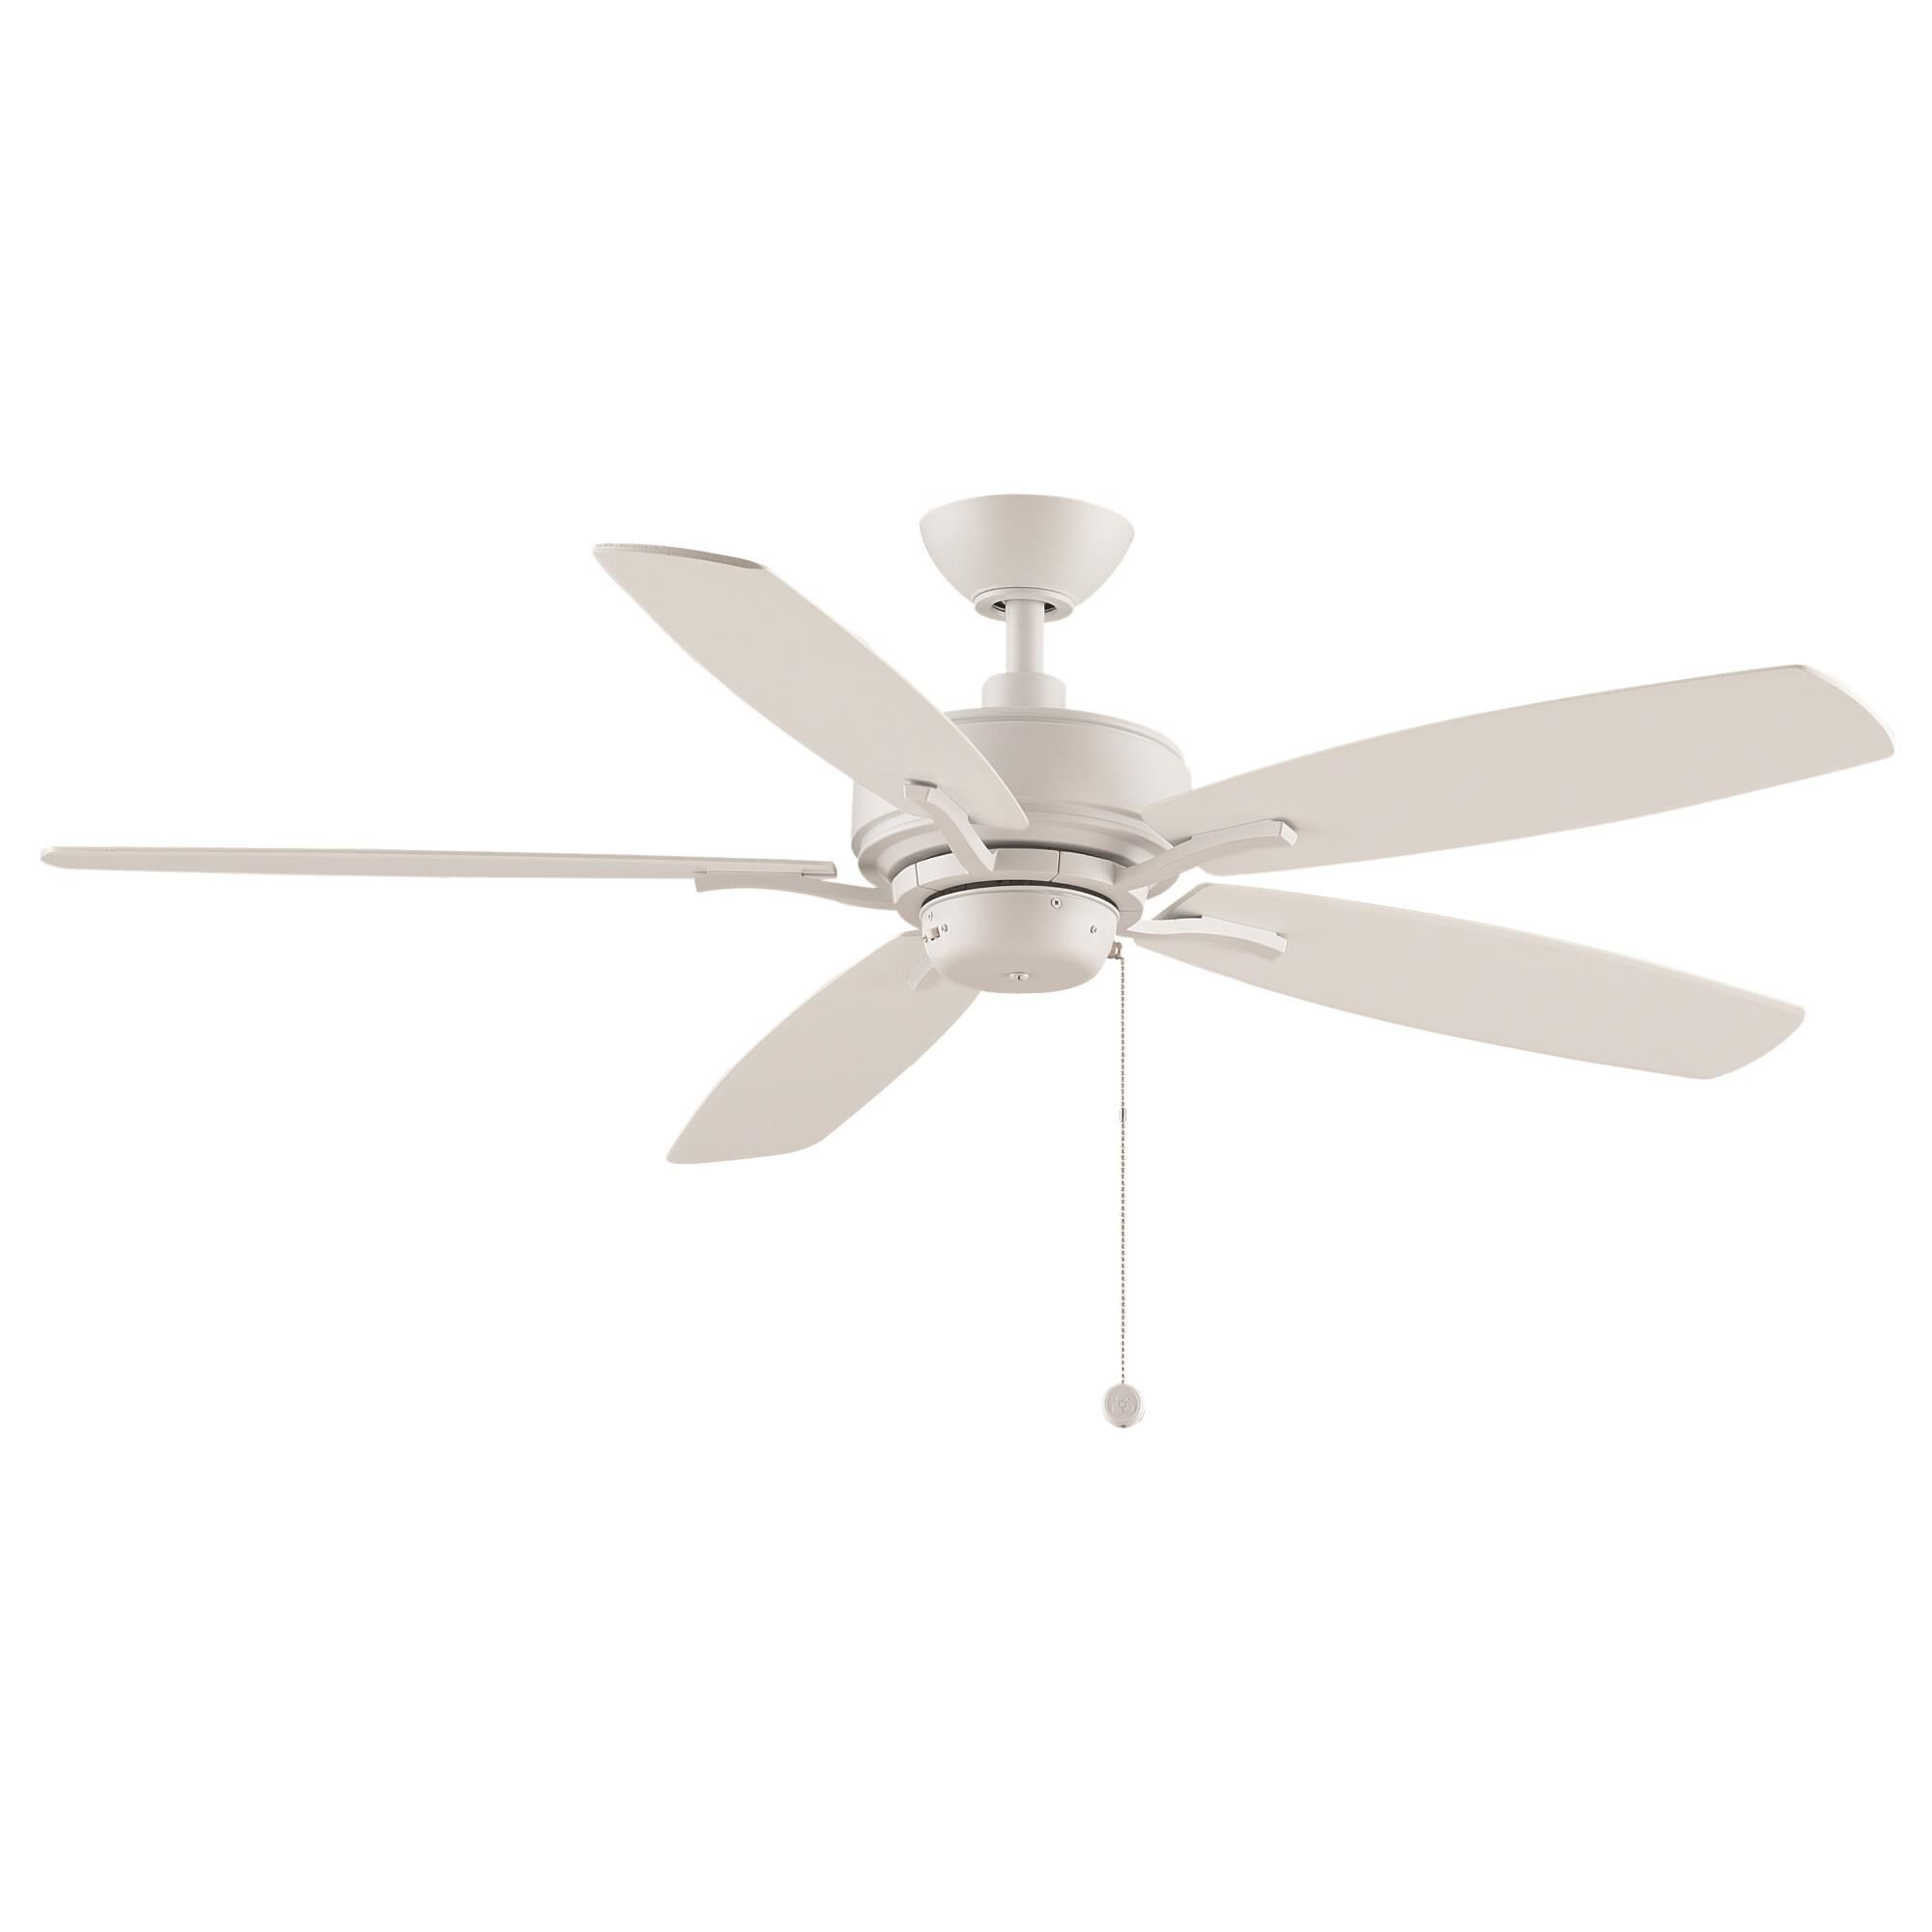 Photos - Fan imation Aire Deluxe Ceiling  Aire Deluxe - FP6284MW - Transitional F